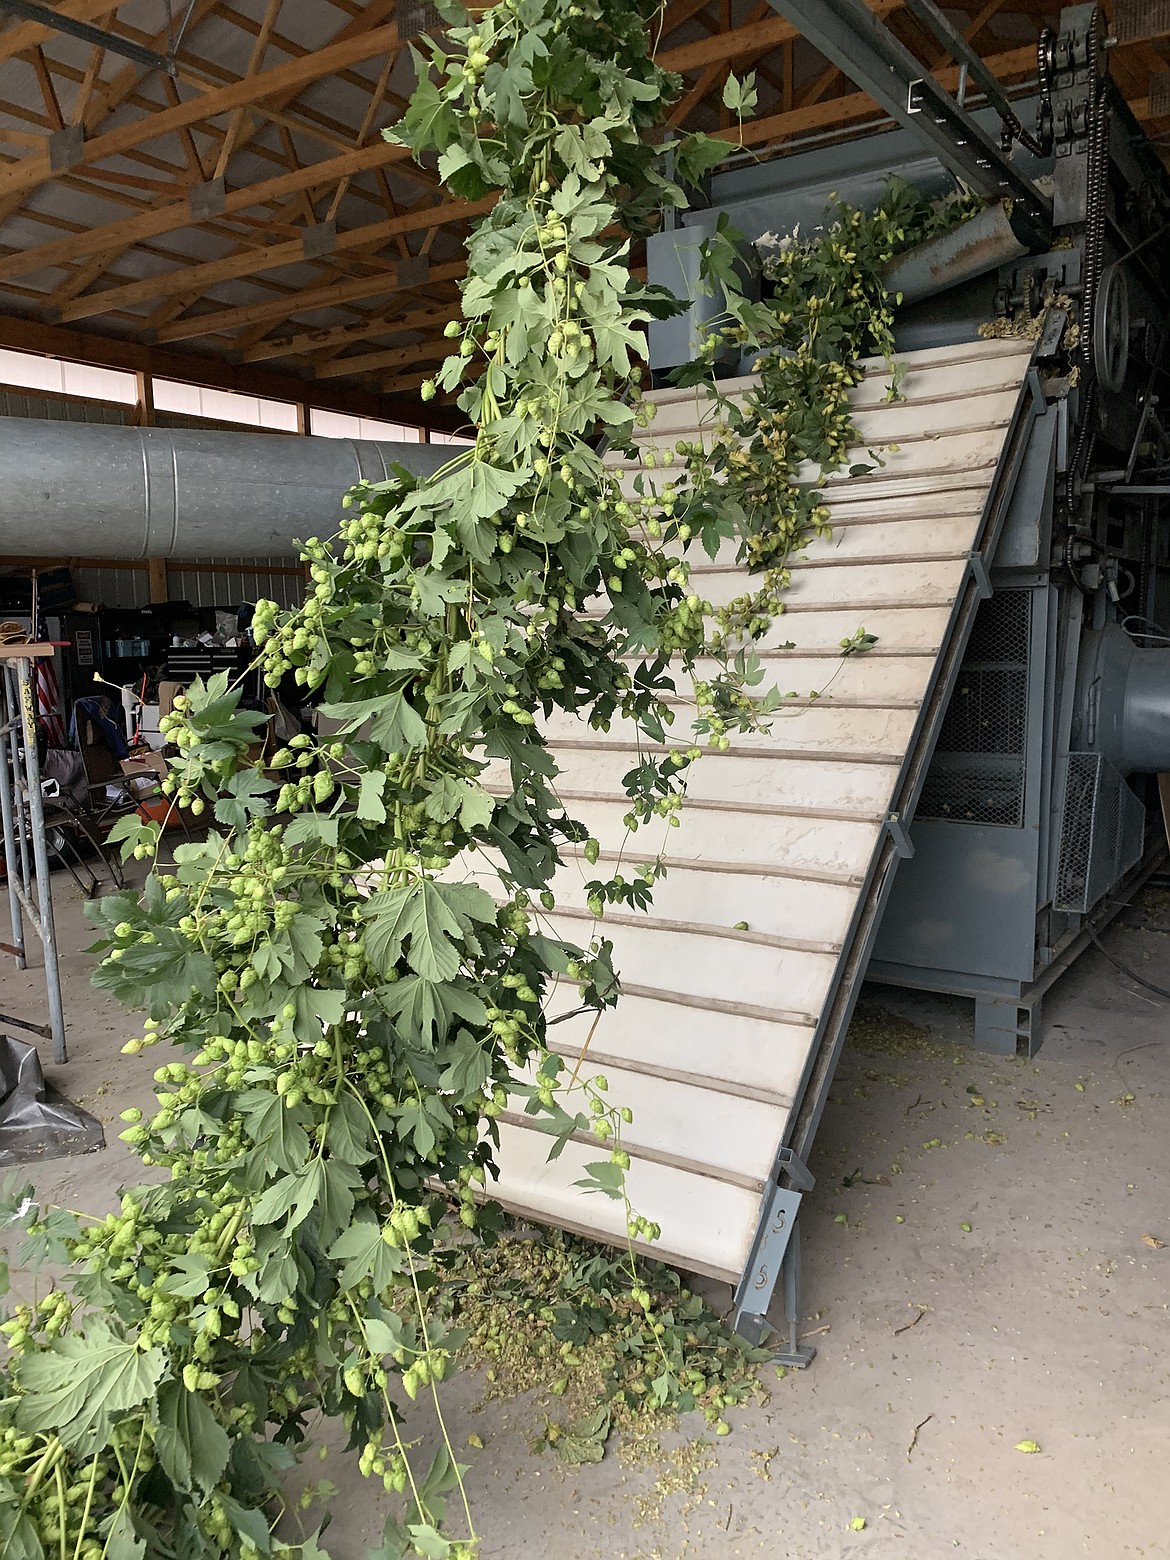 The 18-foot long hops plants are fed through the processor to separate the flowers from the rest of the plant. (photo provided)